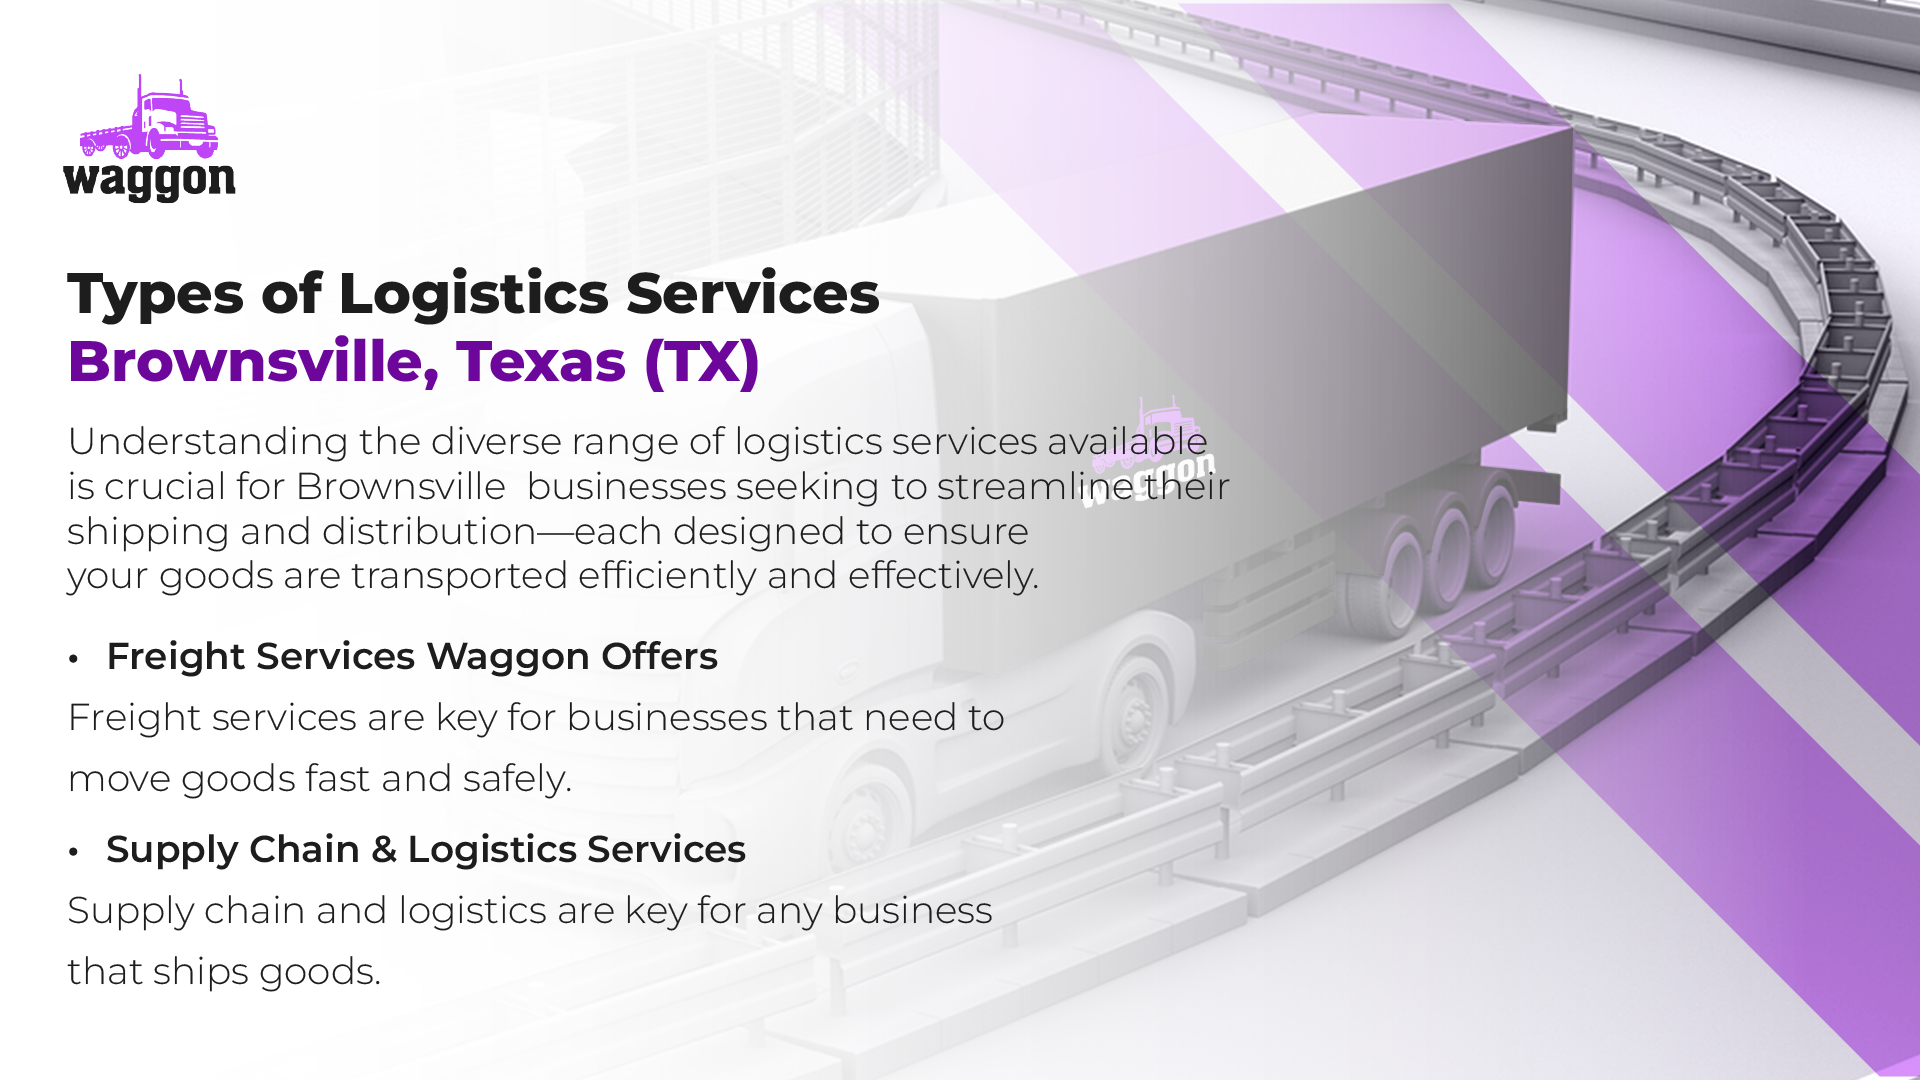 Types of Logistics Services in Brownsville, Texas (TX)